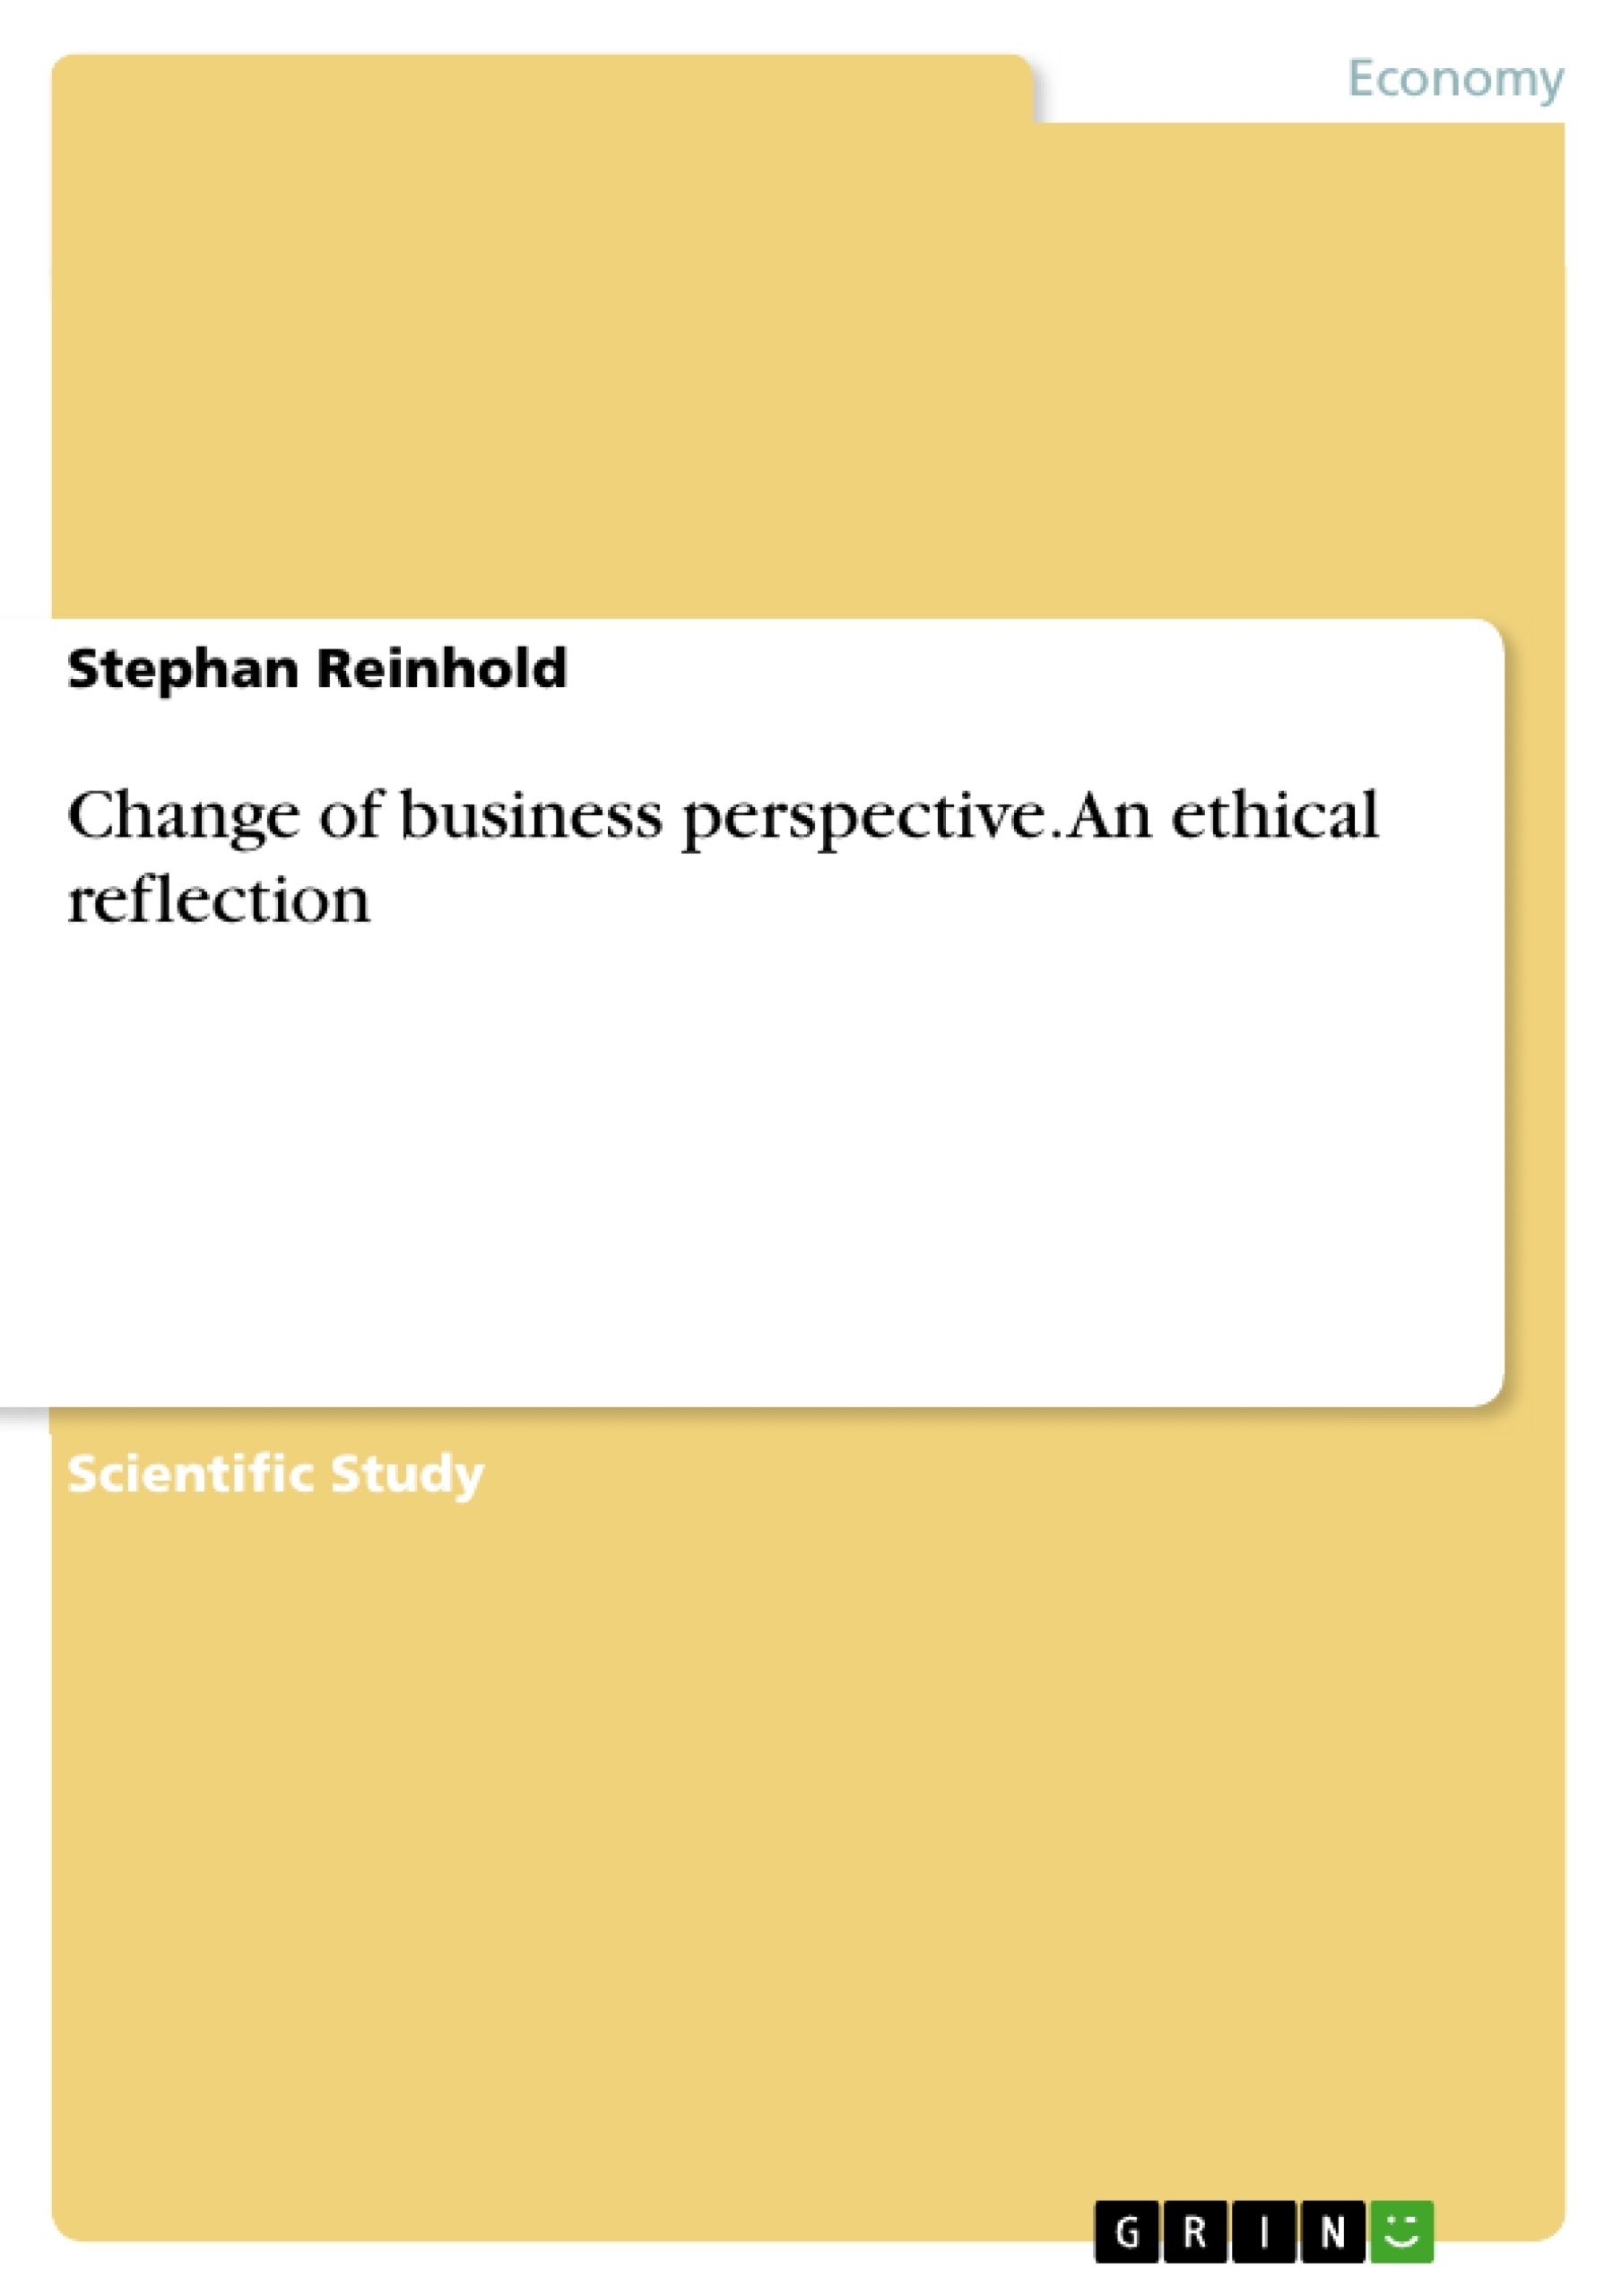 Title: Change of business perspective. An ethical reflection